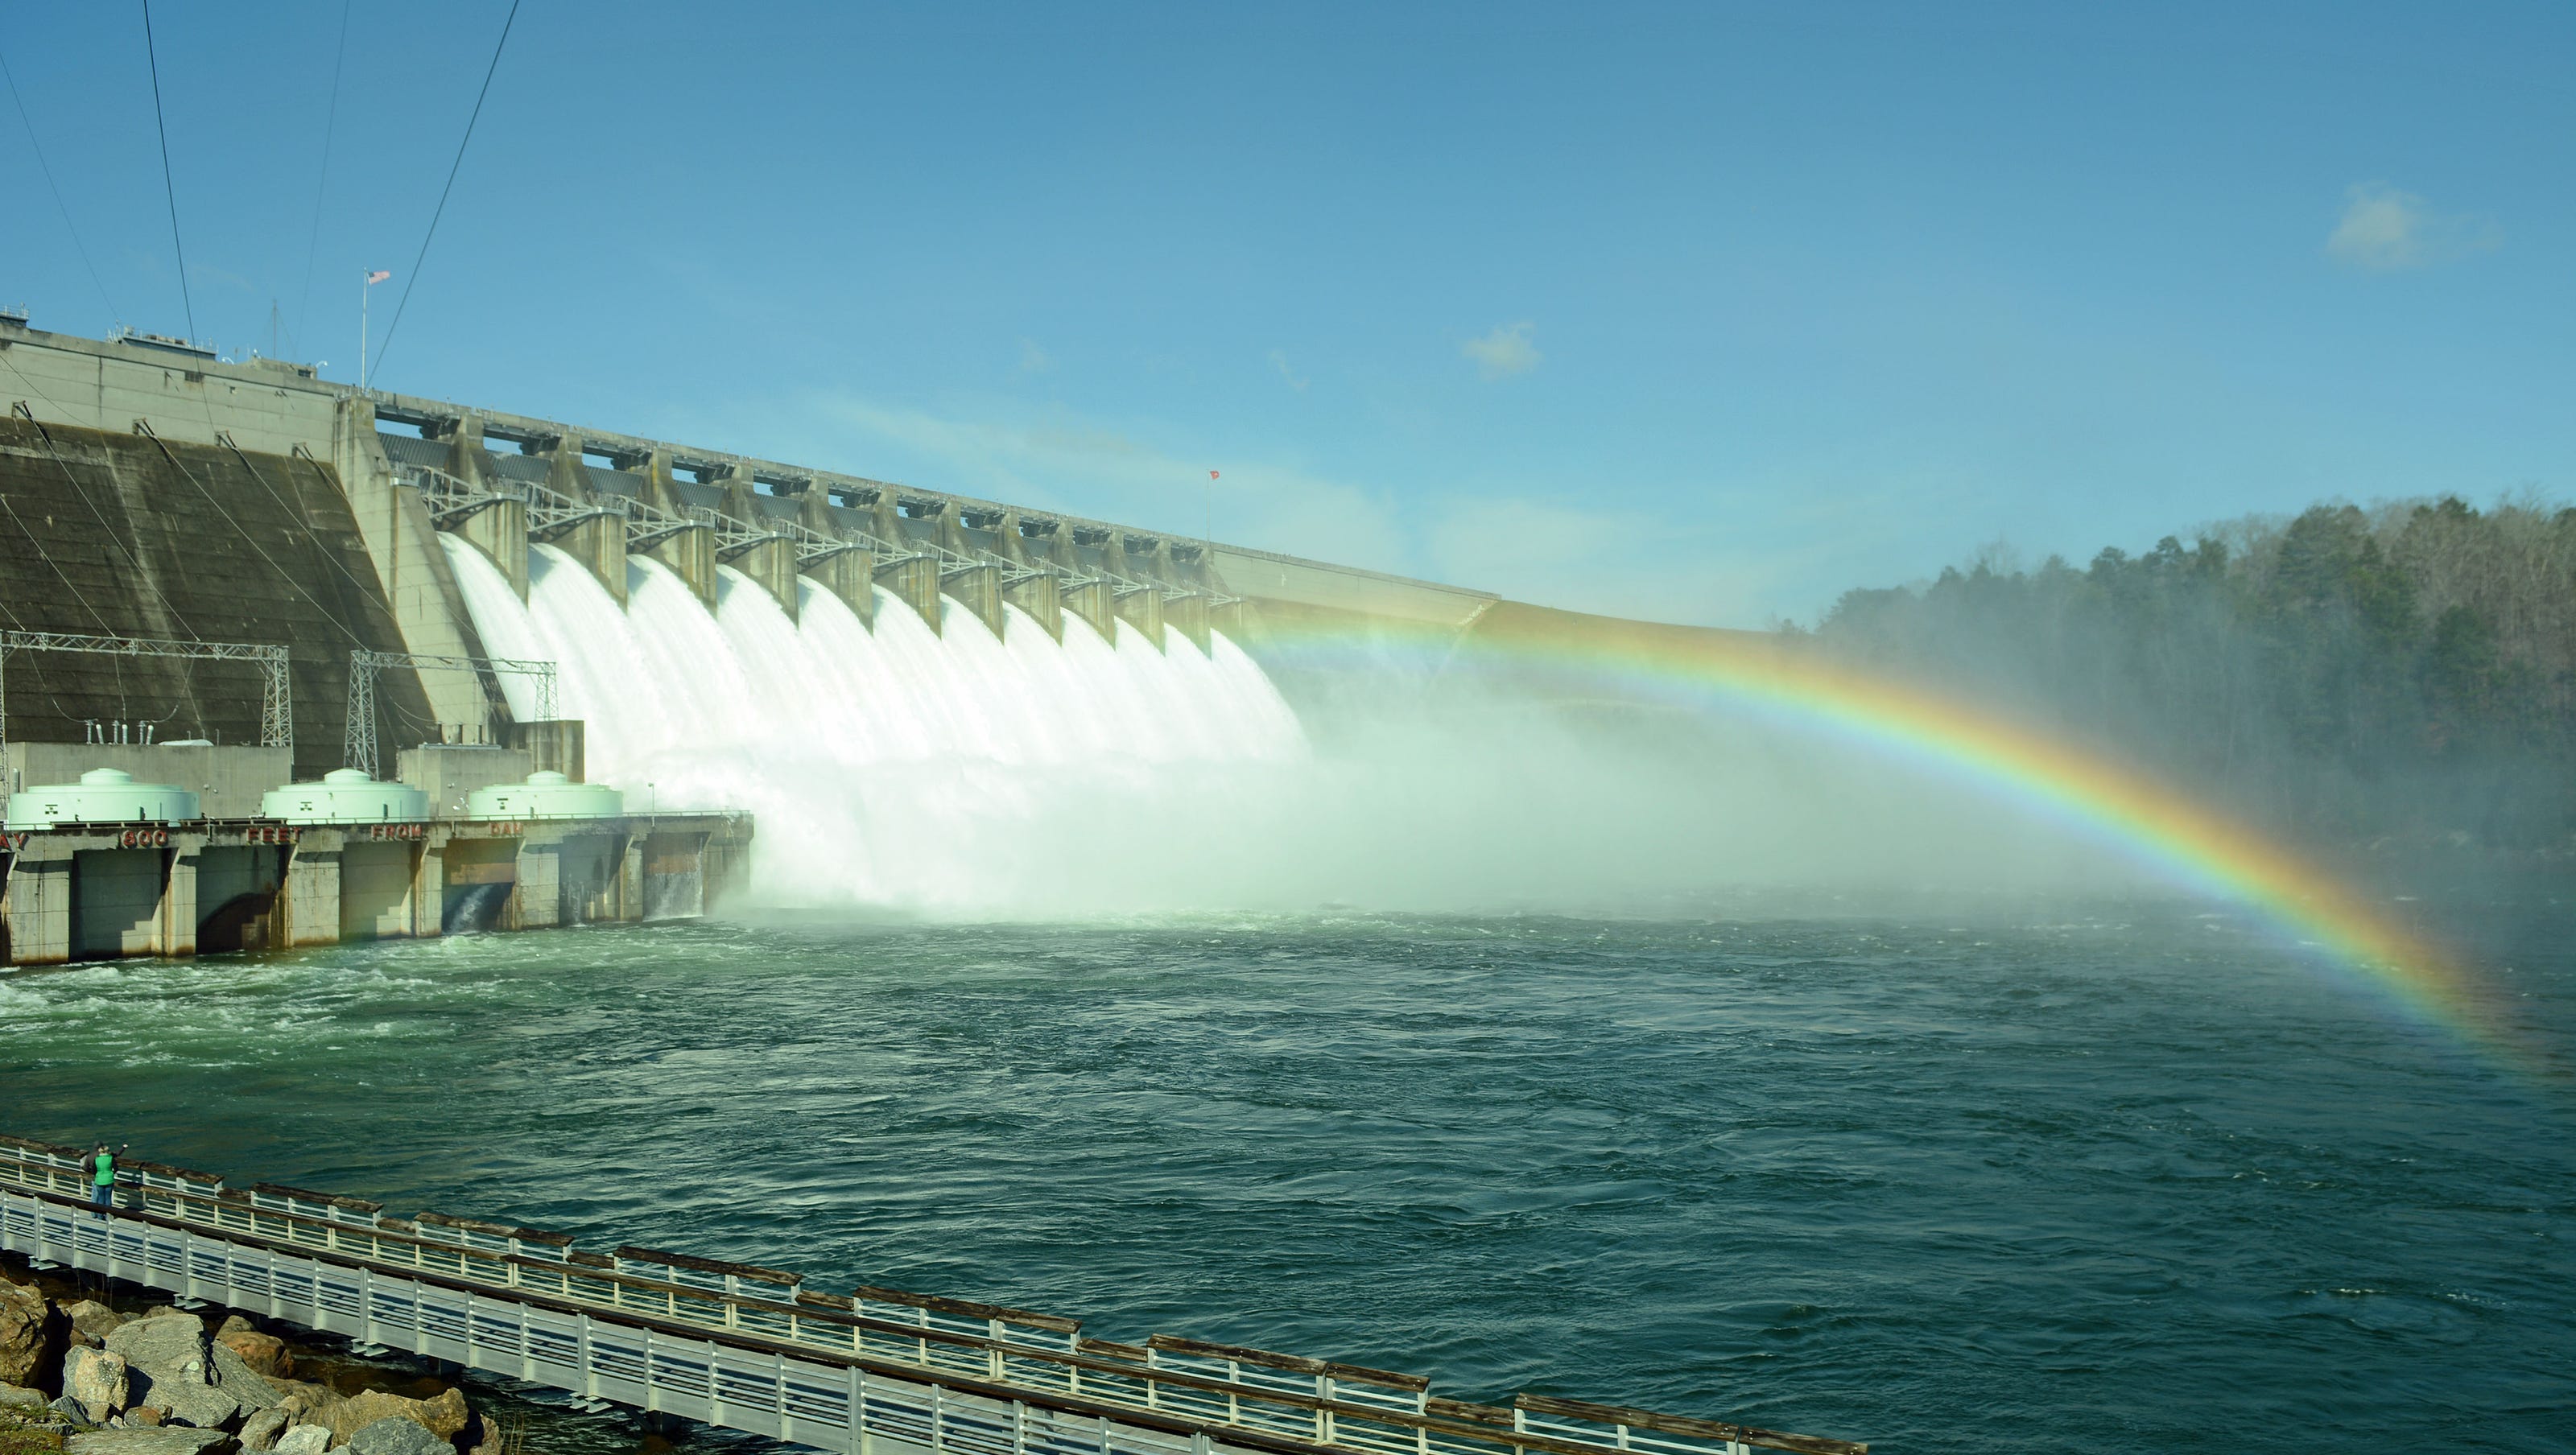 All 12 spillway gates opened at Hartwell Dam